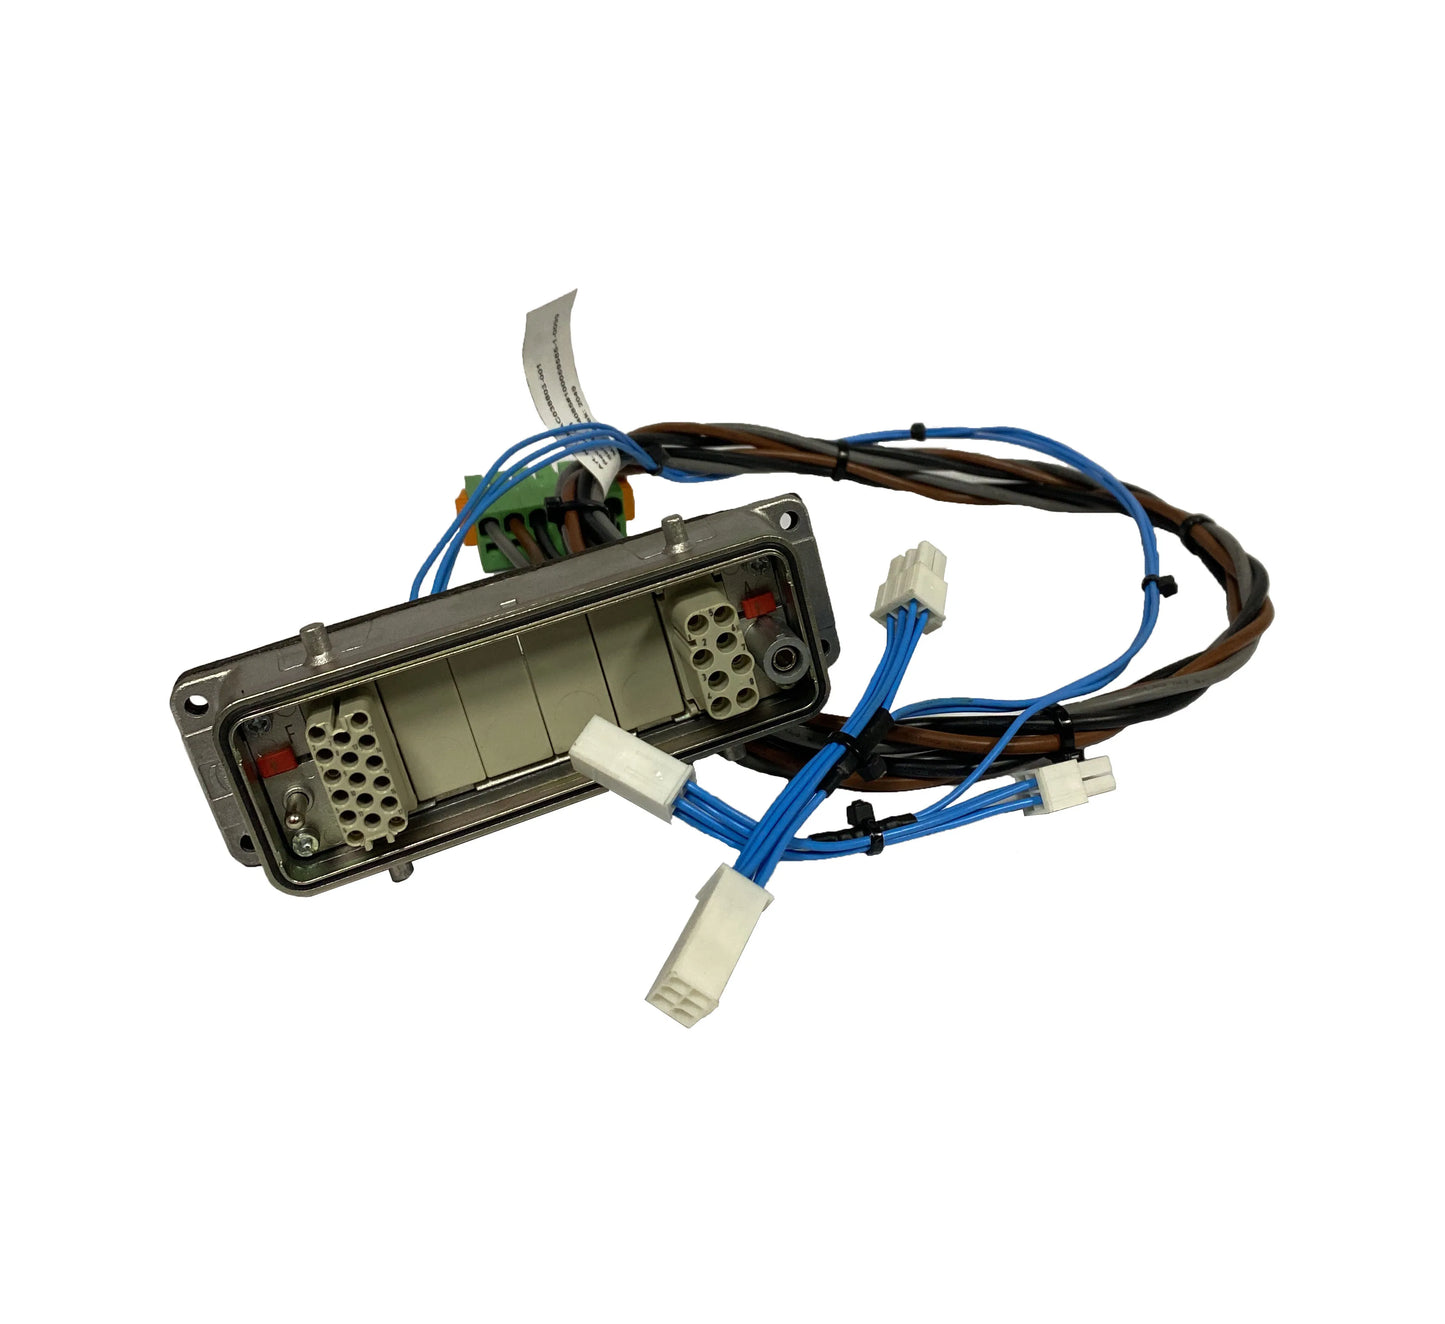 Harness Drive Unit for Industrial Robot Drive Cables